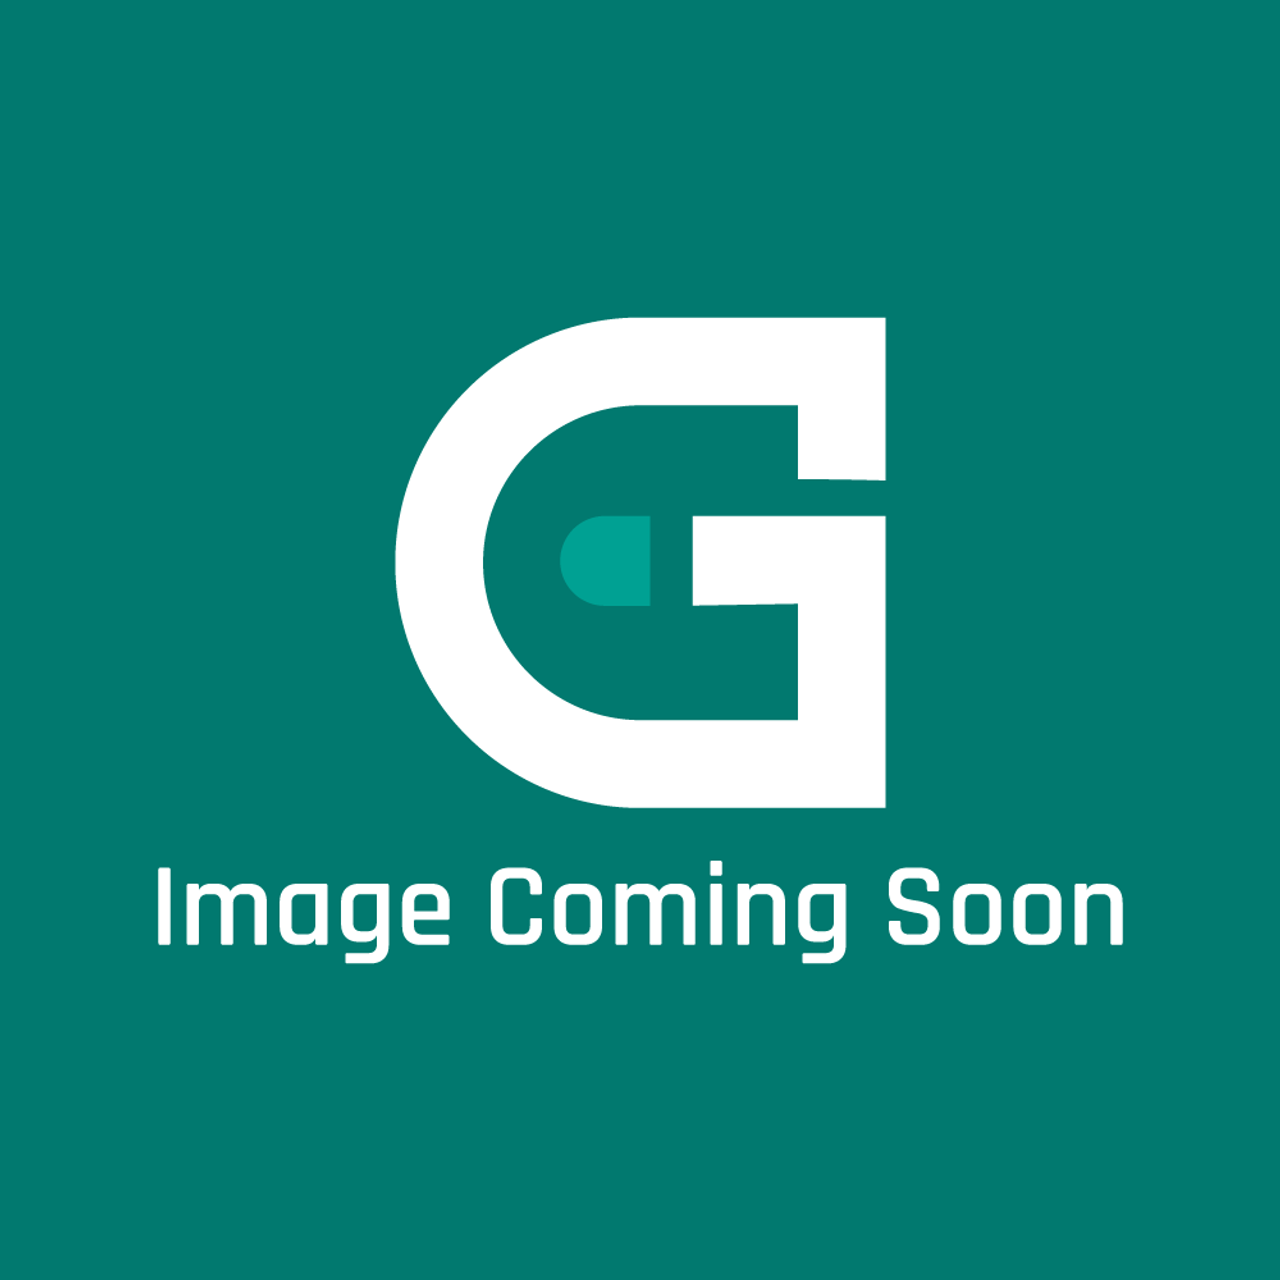 AGA Marvel 42248150 - S/A-Compressor Wire Hns (41011889) - Image Coming Soon!